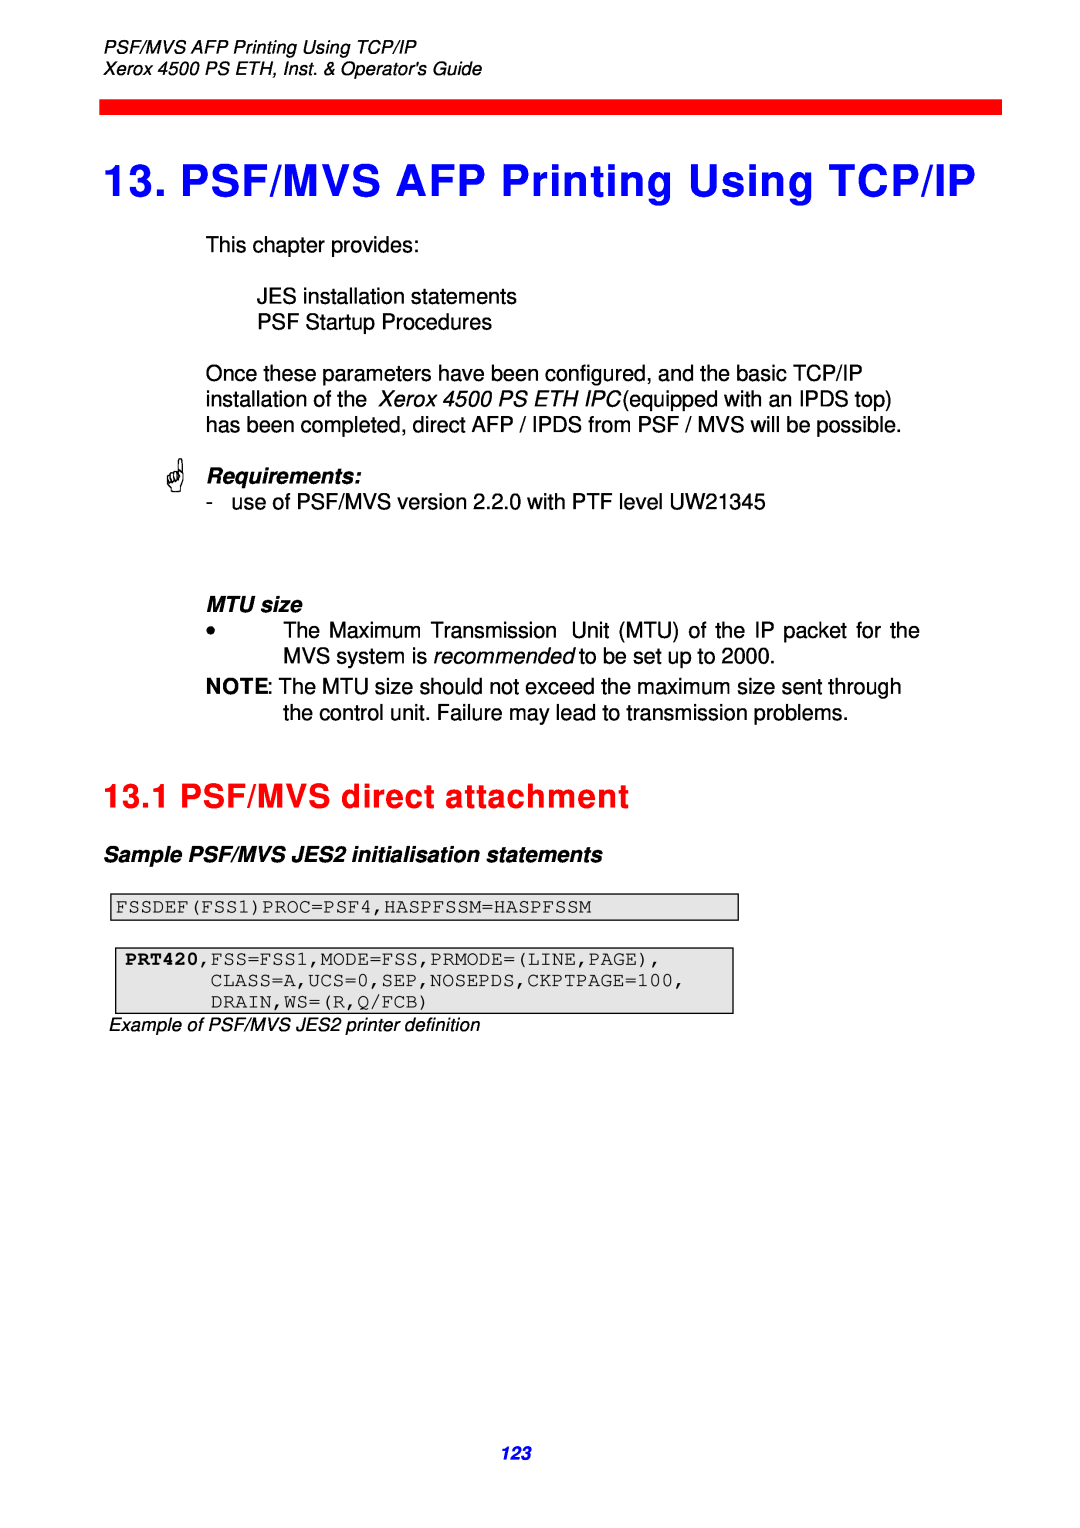 Xerox 4500 ps eth PSF/MVS AFP Printing Using TCP/IP, 13.1 PSF/MVS direct attachment, MTU size, Requirements 